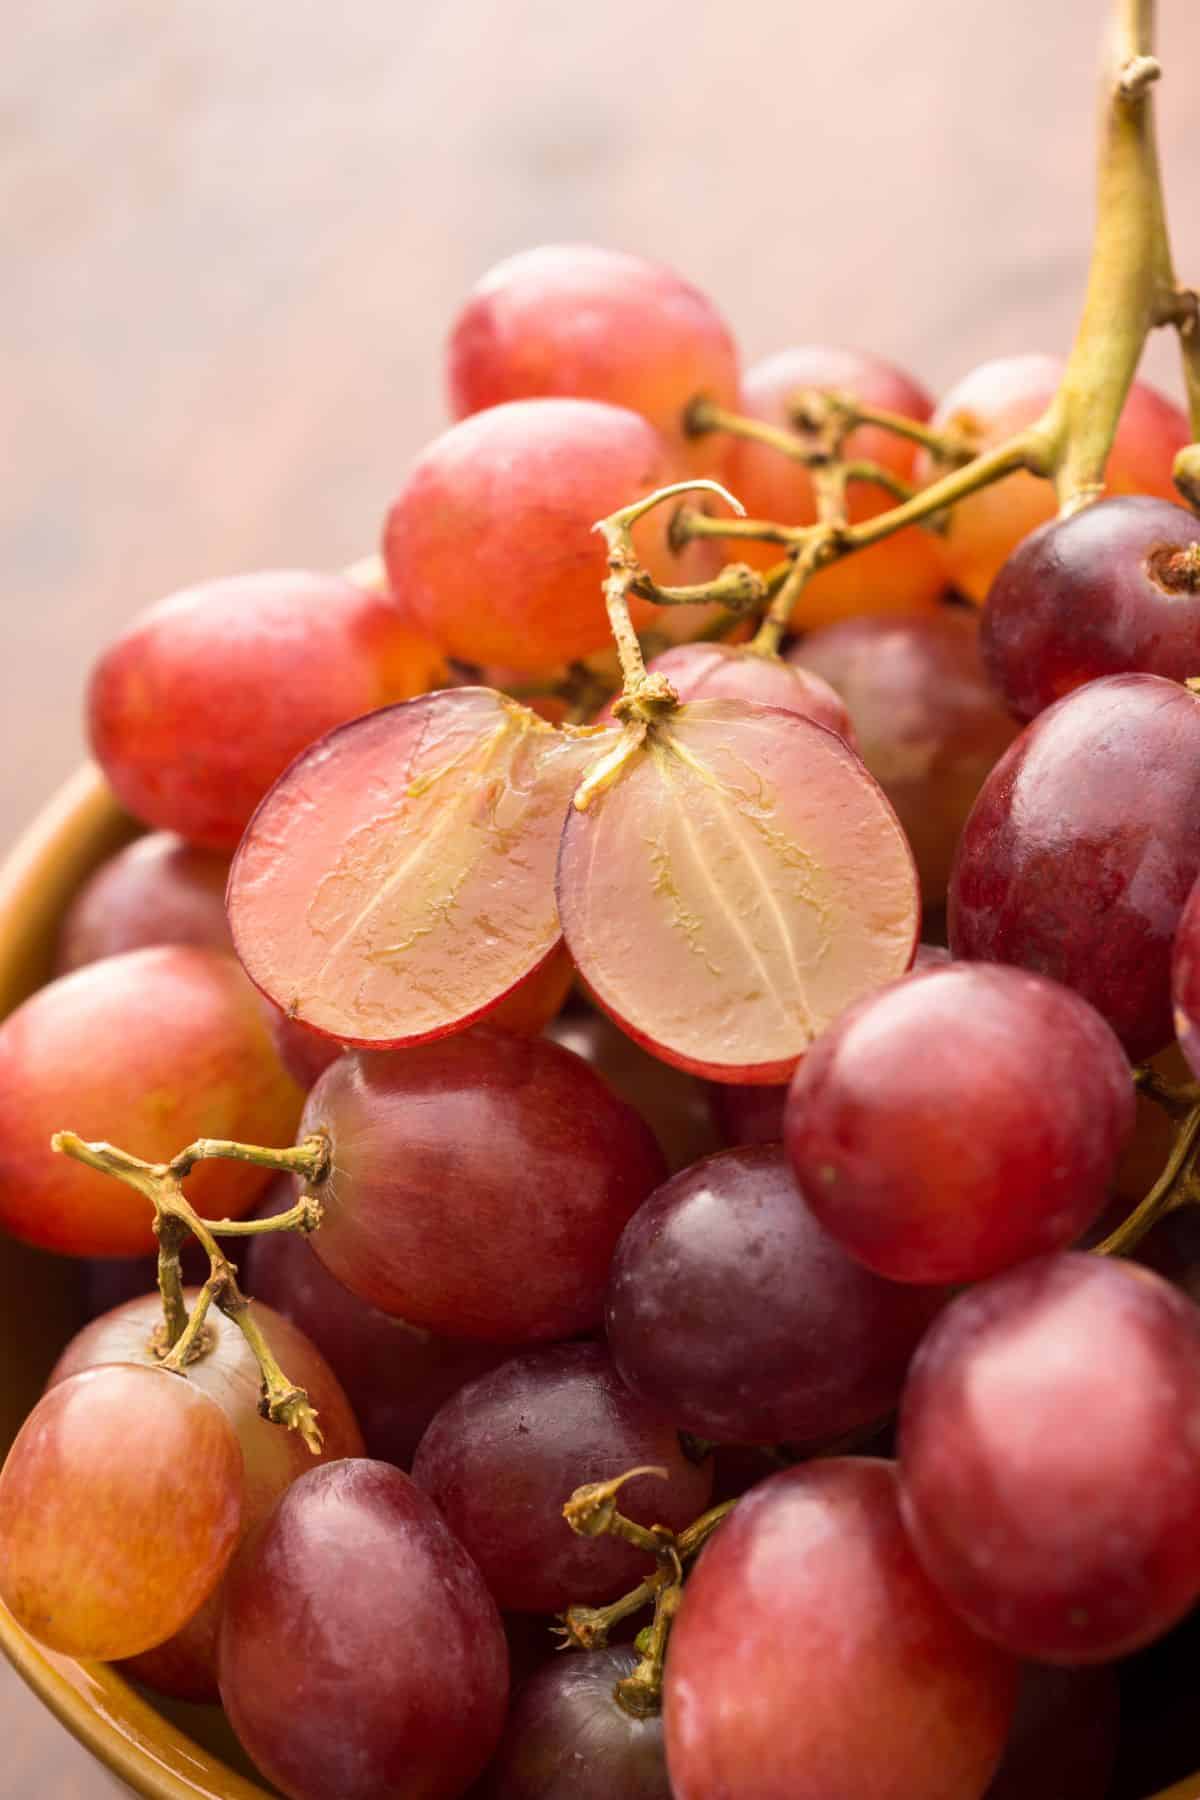 a pile of red grapes with one or two cut open to reveal seedless grapes.